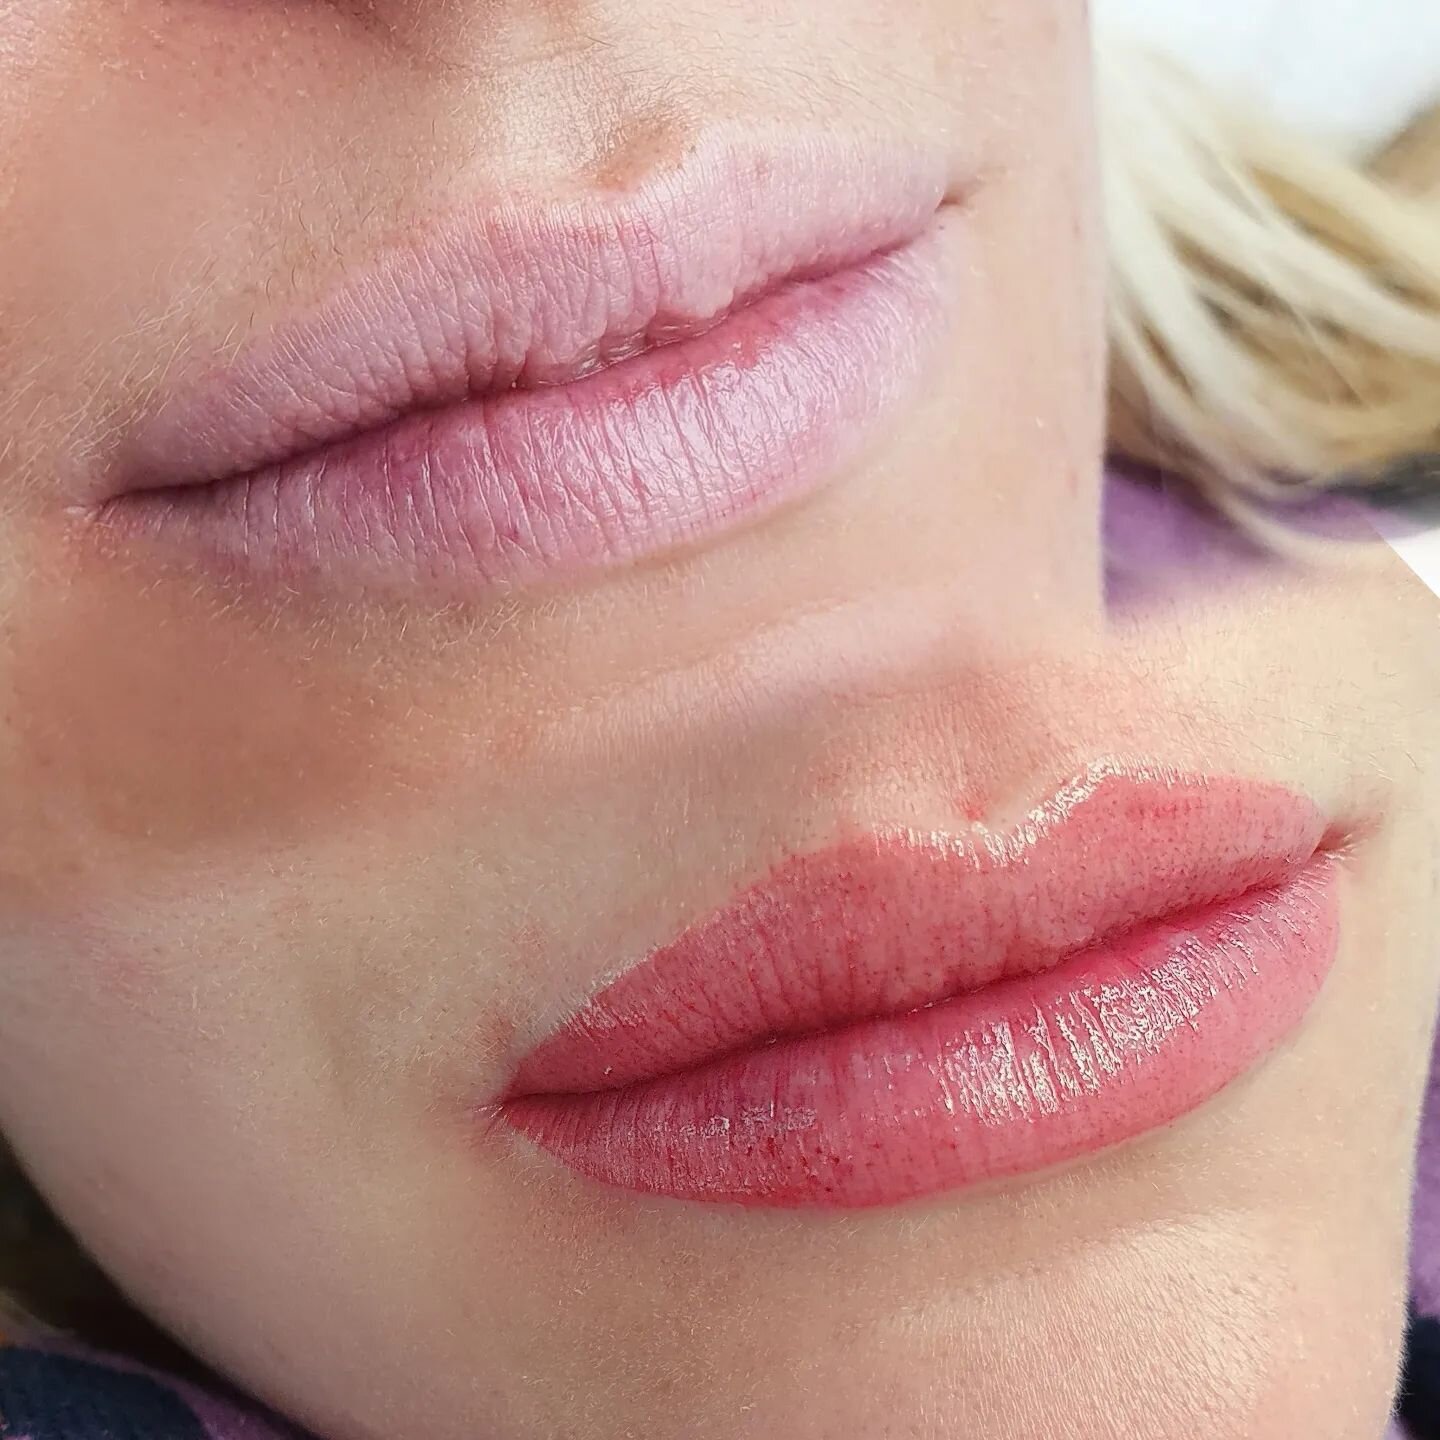 This is a sign, for you to book in to get your lips tattooed. Discover the freedom of not having to touch up your lipstick, you won't regret it! 👏
.
Book now link in bio